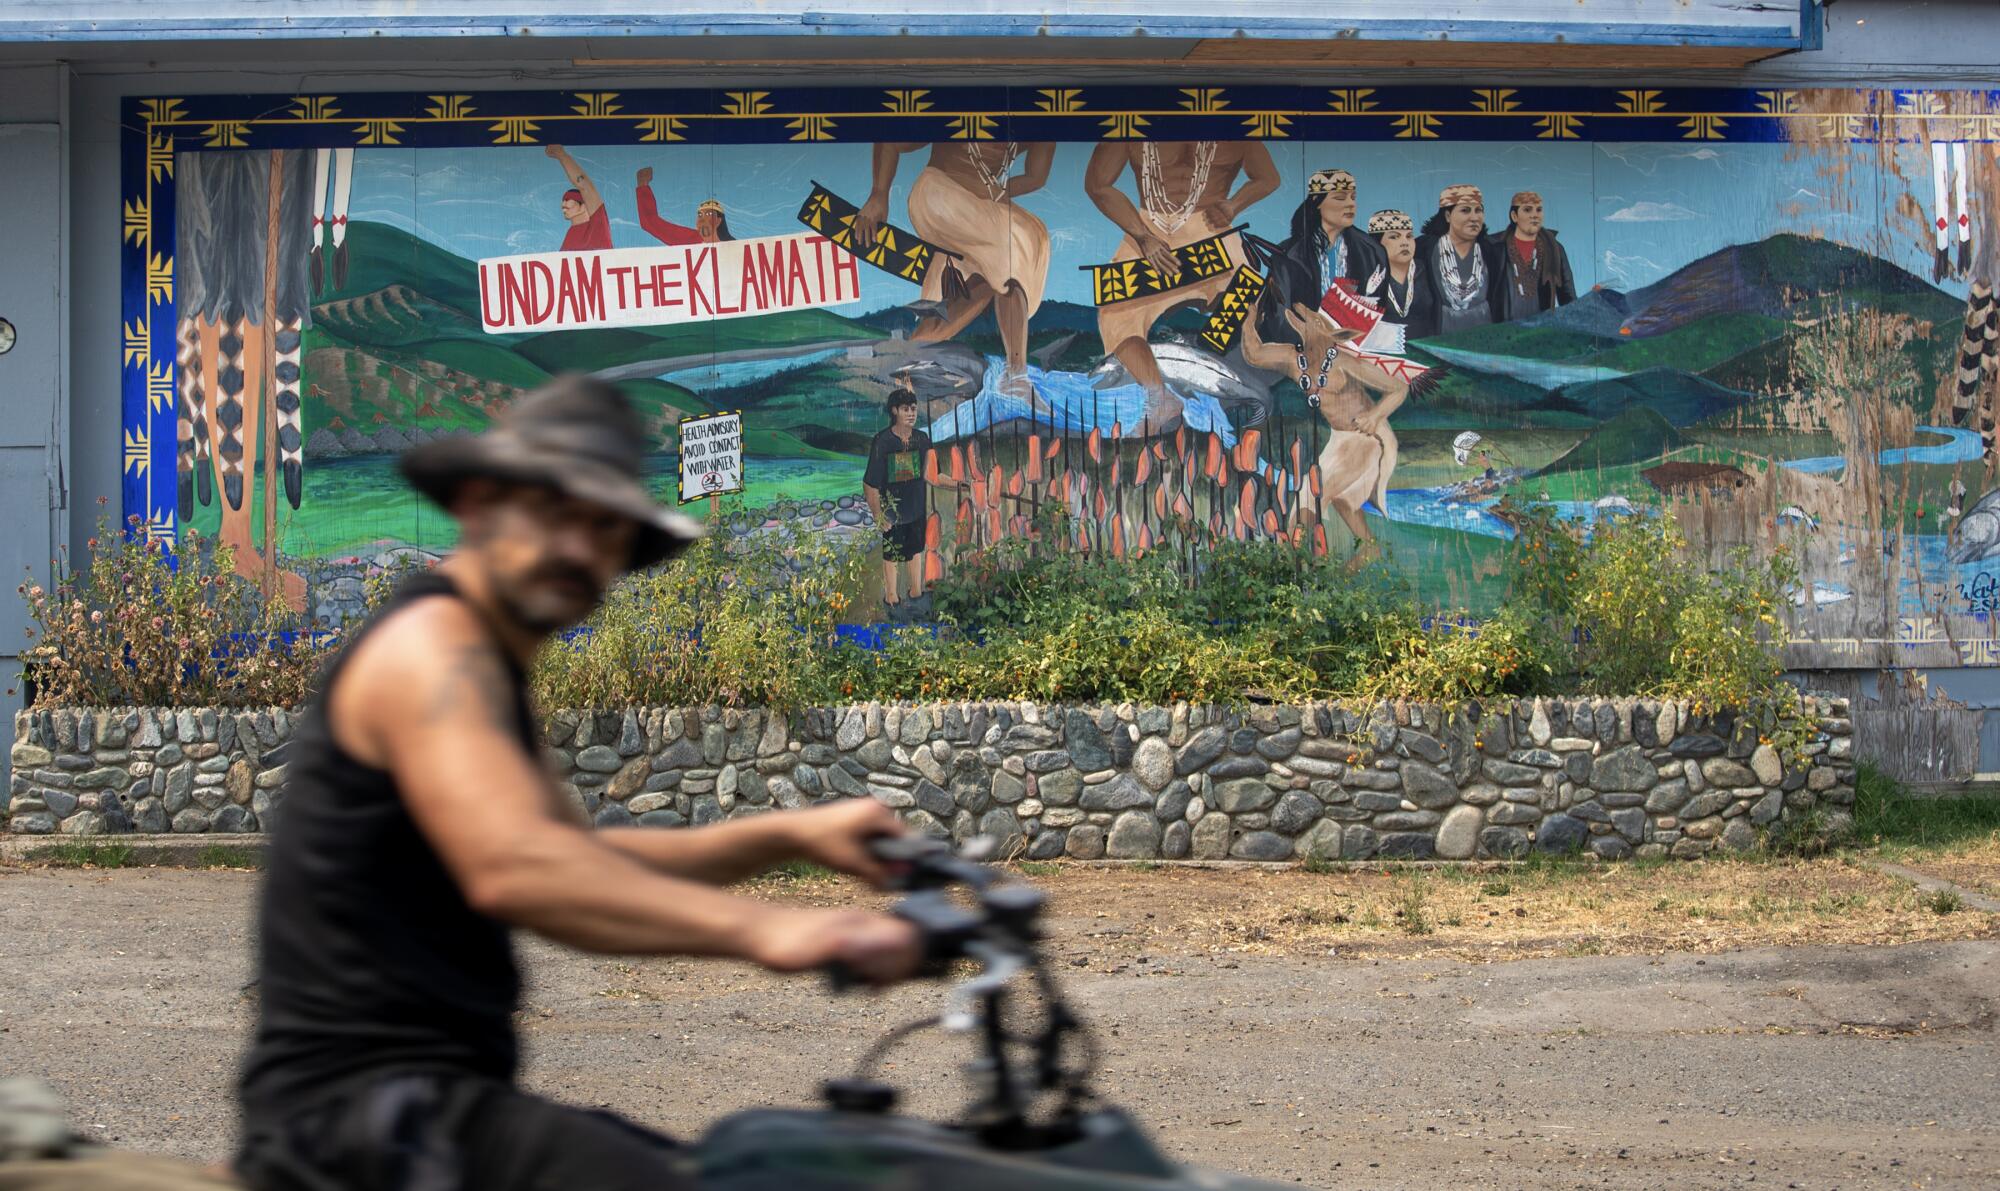 A man rides past large mural on a wall.